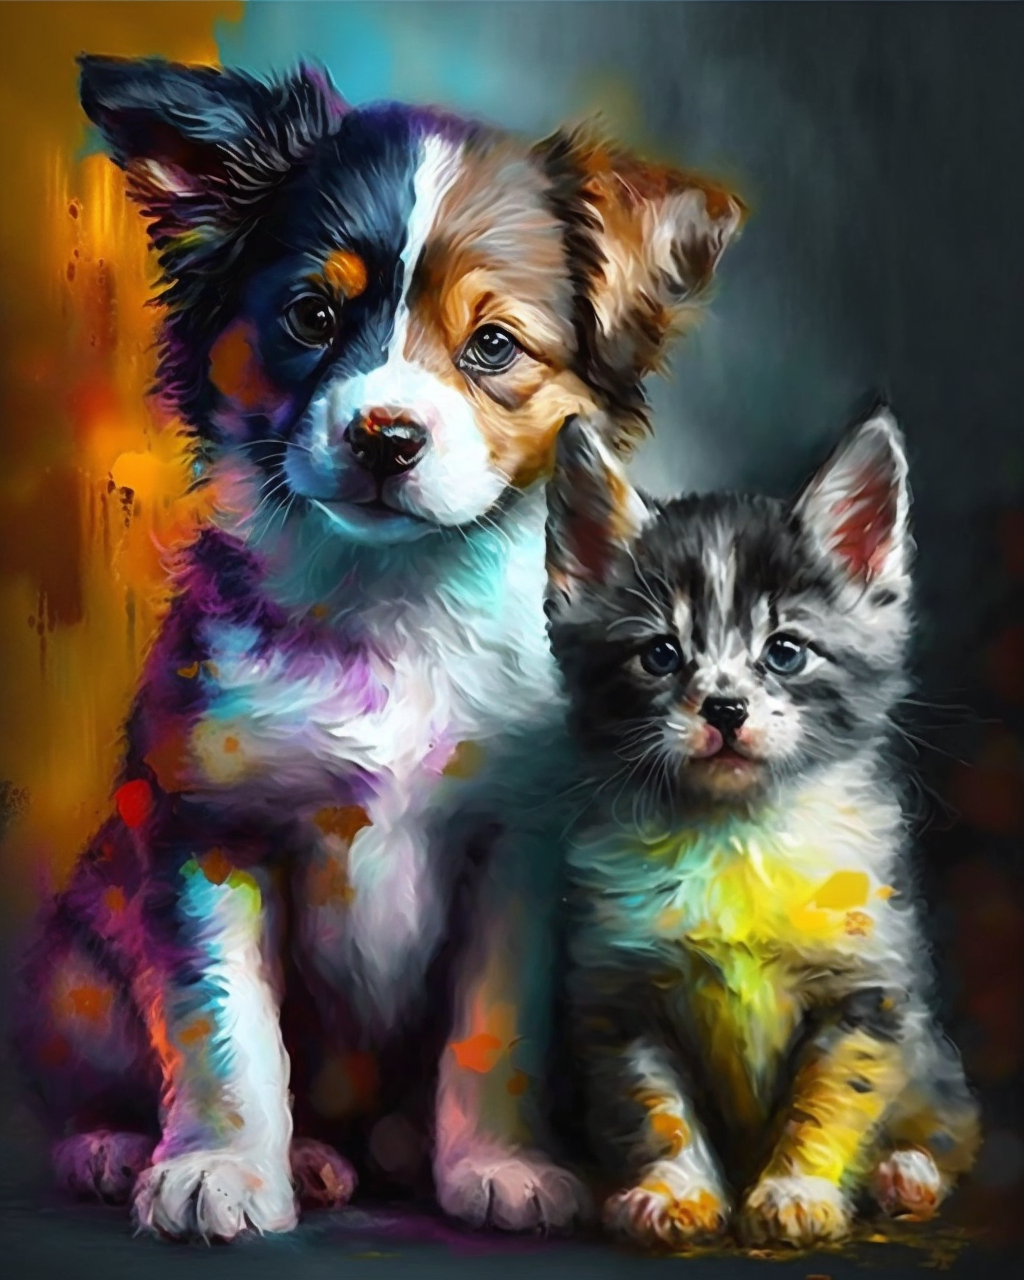 Puppy and His Little Kitten Friend Paint by Number Free Shipping - Paintarthub